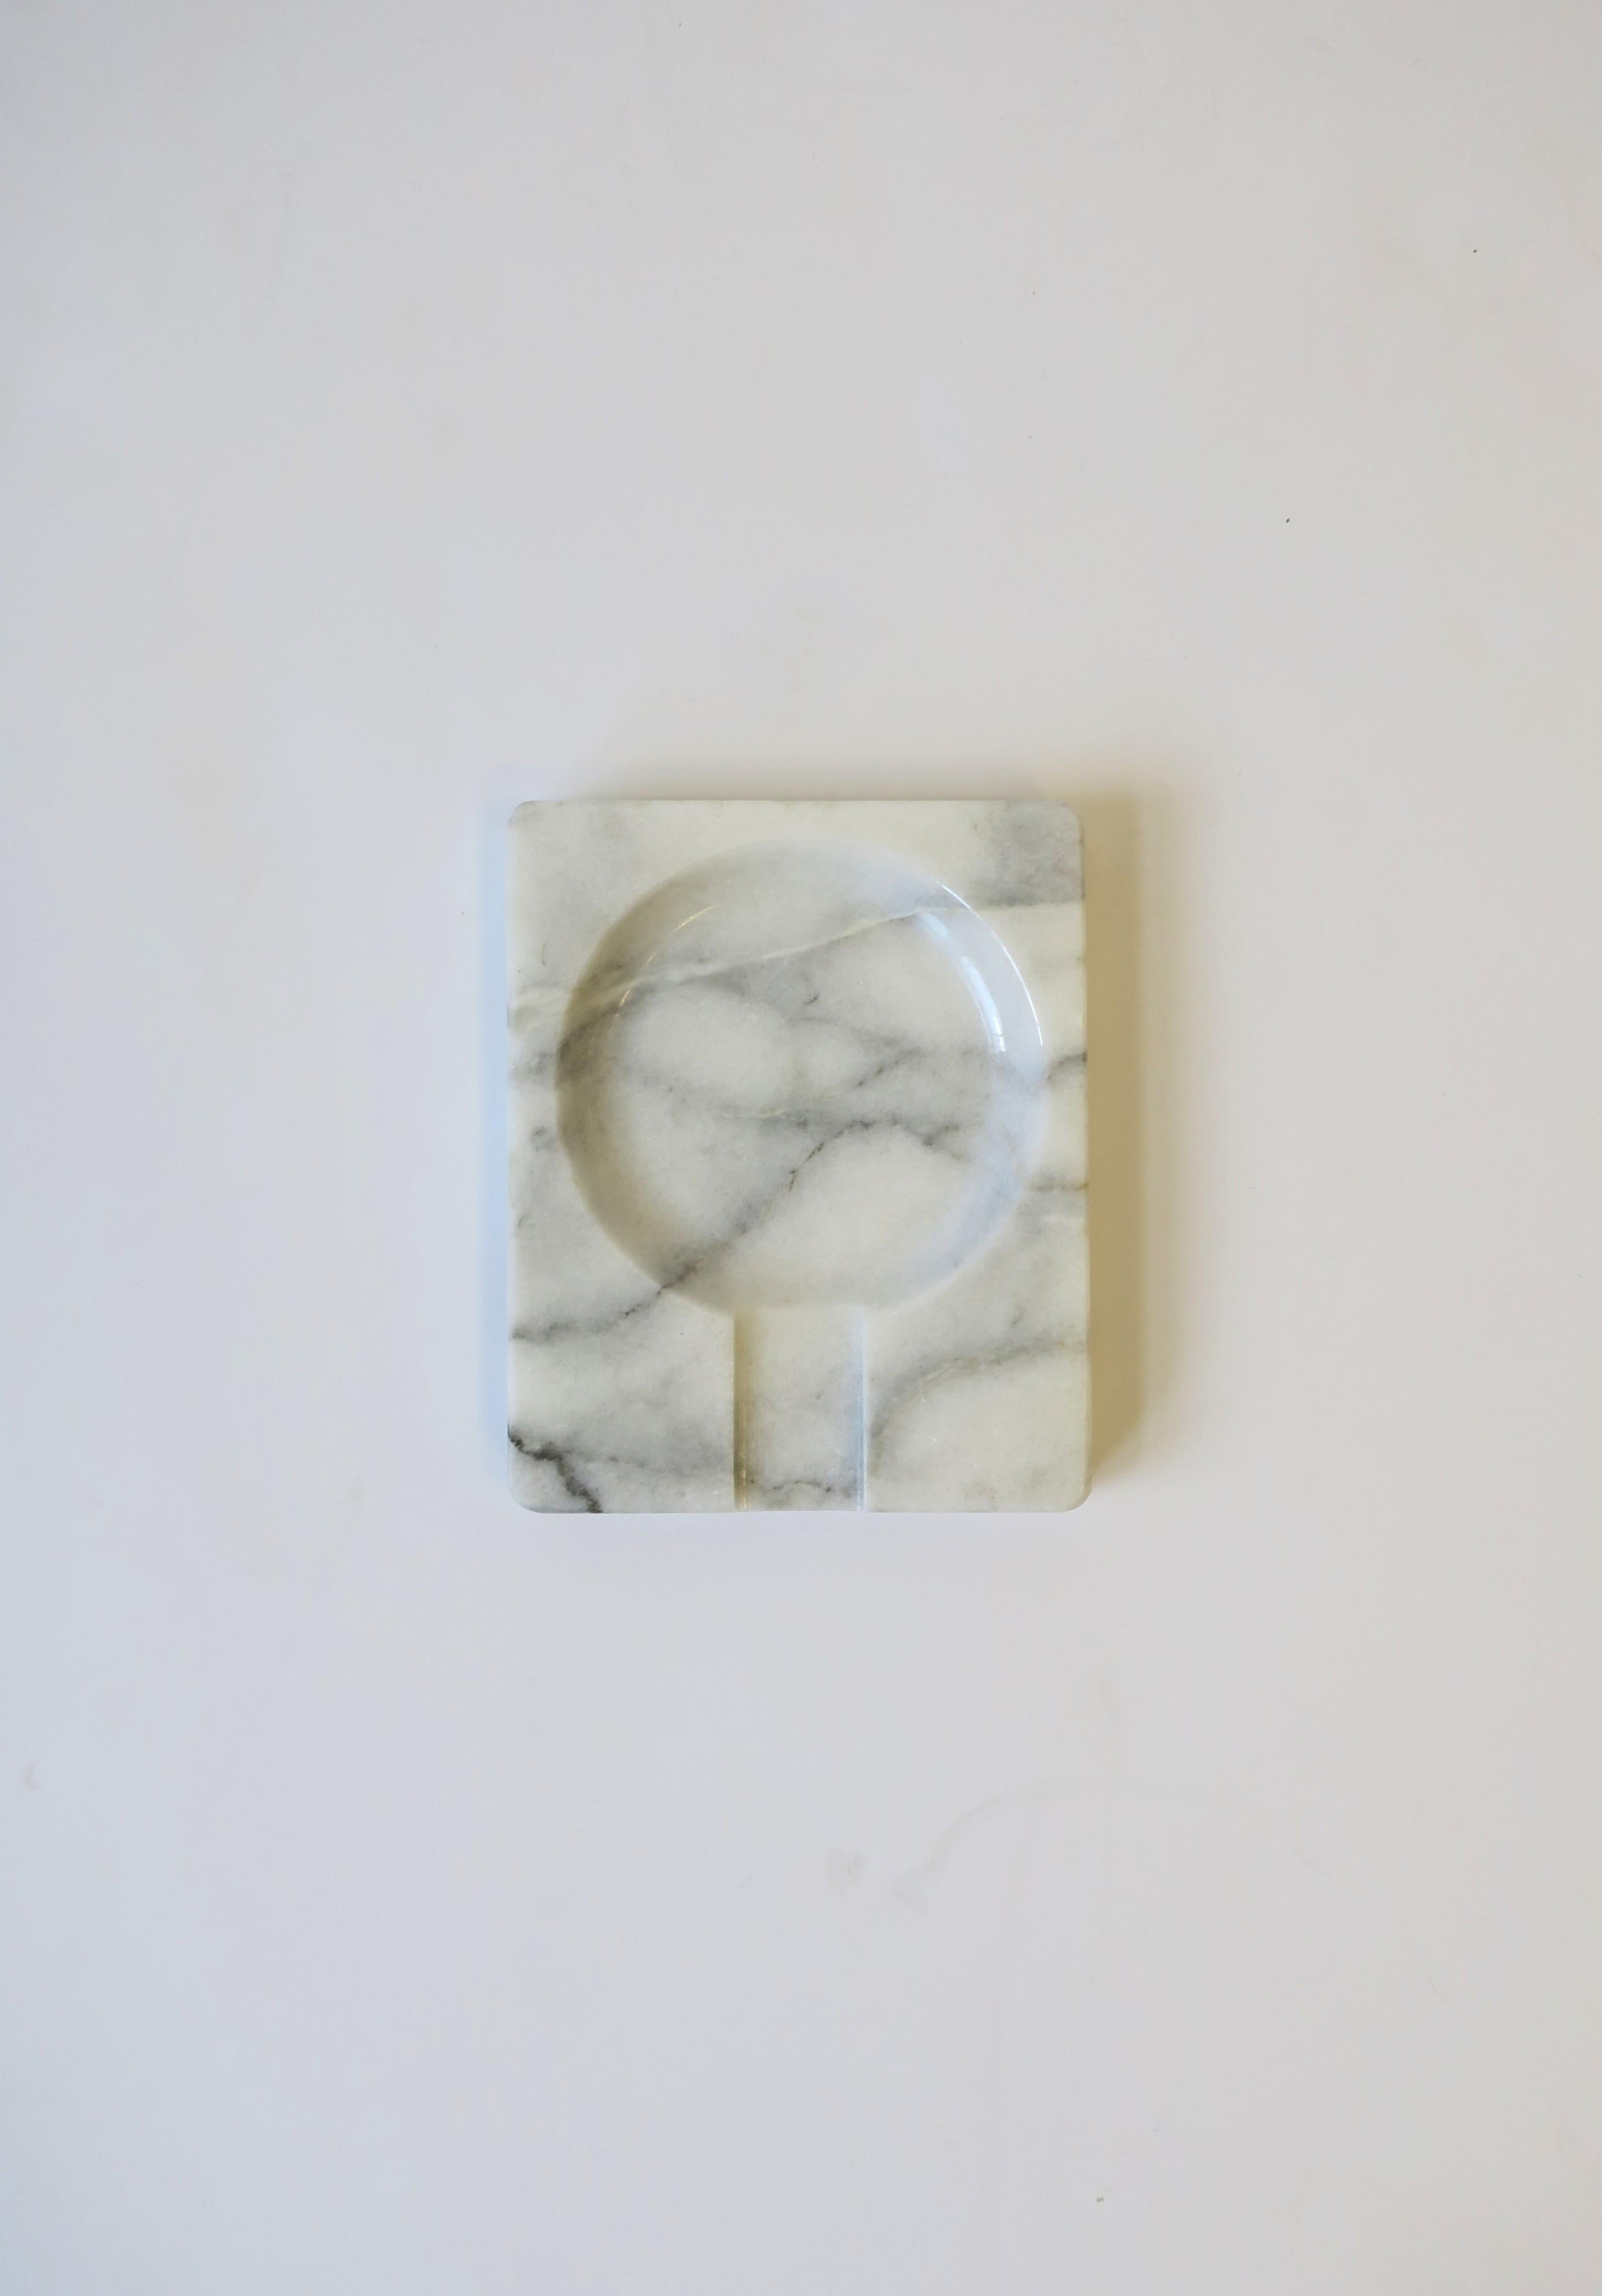 A Post-Modern Carrara marble ashtray or vide-poche catchall, circa 1970s. Piece is rectangular with cutout area for tobacco products (cigar, cigarette, etc.) Alternatively, piece may be used as a catchall for jewelry (as demonstrated) or other small